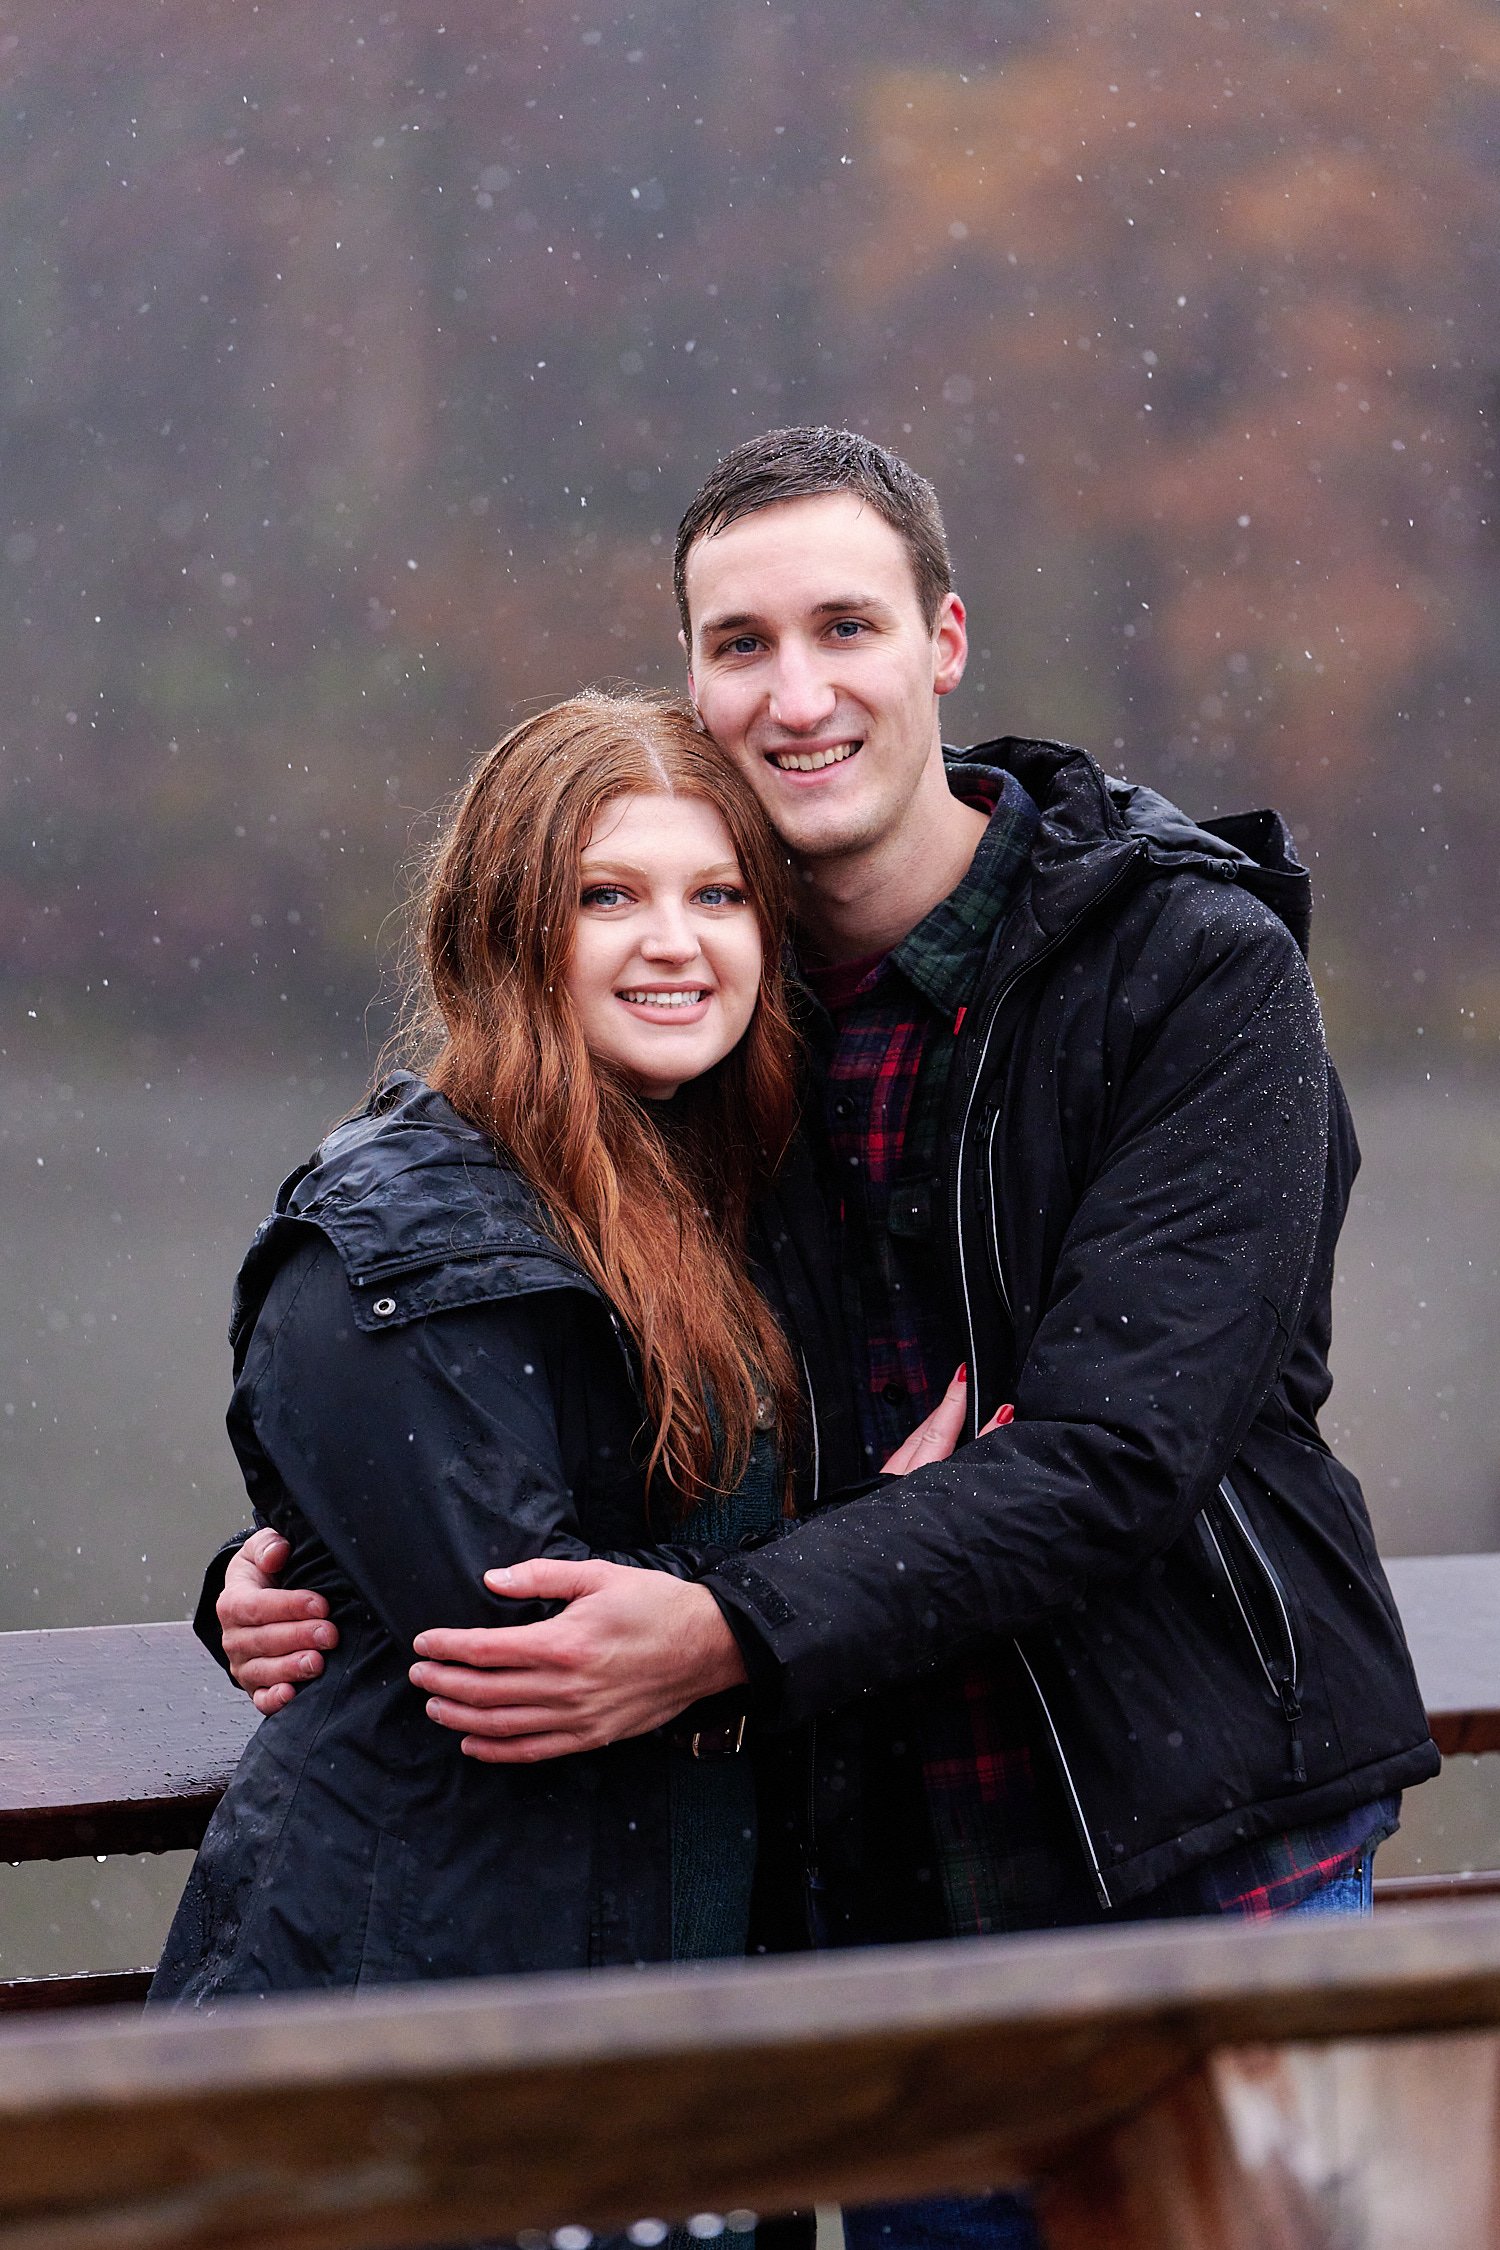  Victoria Detweiler is posing with her new husband on Marshall Island in North Park, Allegheny County near Pittsburgh, Pennsylvania. It’s very cold and it’s snowing. The trees around have few colors. 